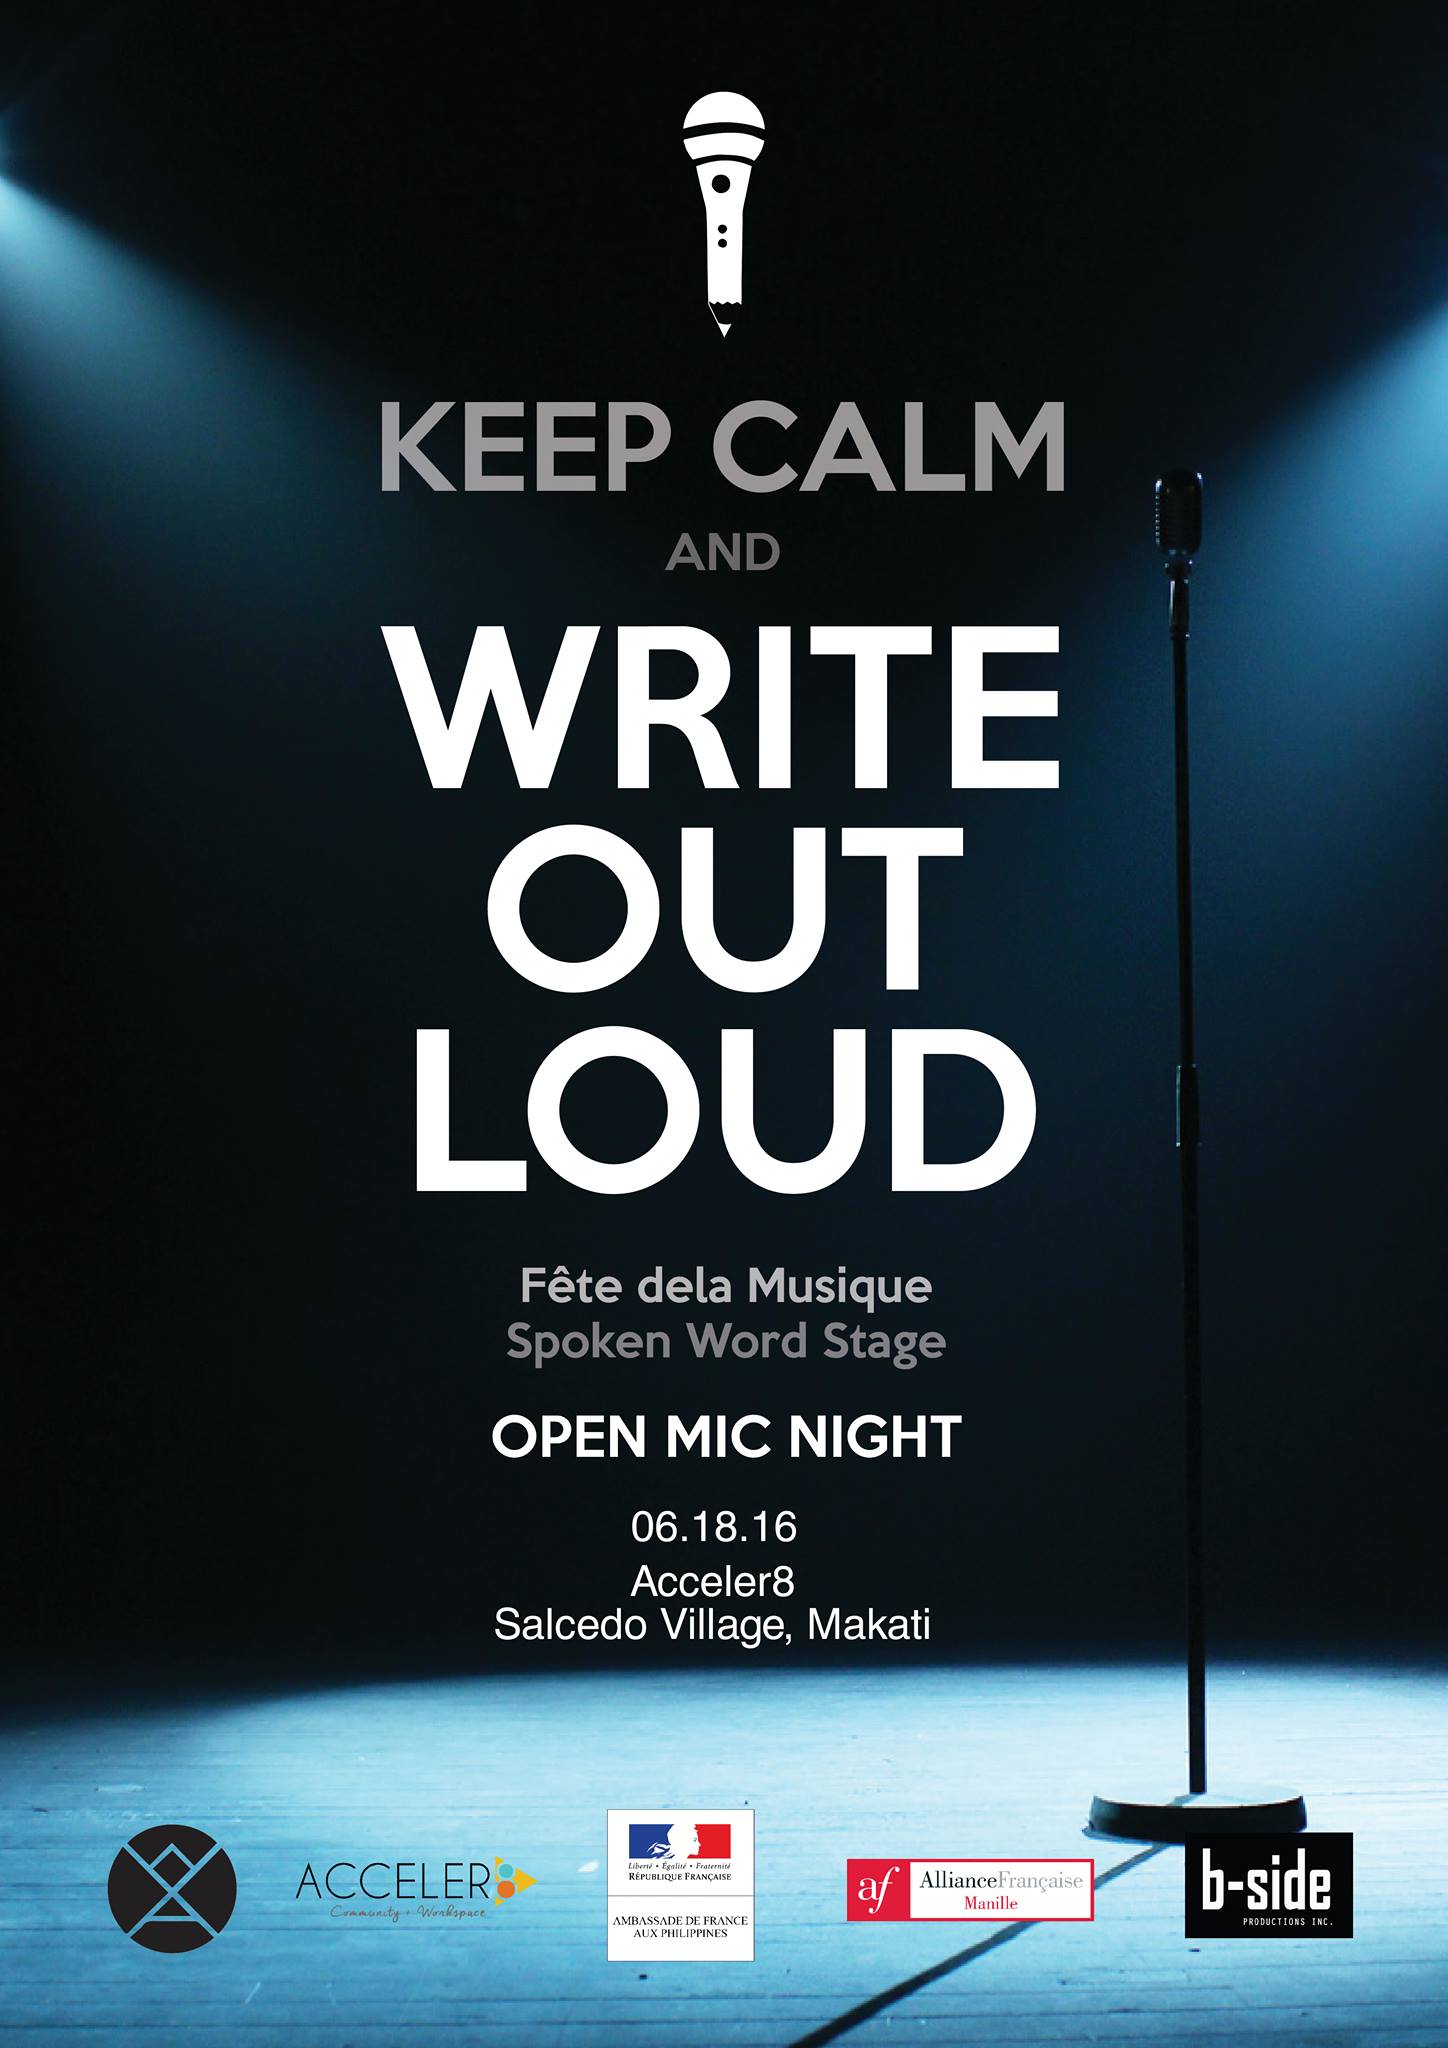 WRITE OUT LOUD! (Féte dela Musique: Spoken Word Stage) clock Today at 7 PM - 12 AM Jun 18 at 7 PM to Jun 19 at 12 AM pin Show Map Acceler8 Coworking FINMAN BUILDING, LEVEL 7-1, 131 TORDESILLAS ST., COR. BAUTISTA ST.,, 1227 Makati, Philippines About Discussion Write Post Add Photo / Video Create Poll Write something... Details May nagbabalik! ♥ ♥ ♥ We're hosting the Spoken Word stage for Feté dela Musique. Some members of Words Anonymous will be performing along with some musical guests. This is also a poetry and open mic night so get your pieces ready, the stage is yours! 18 June 2016 | 7pm - 12am | Acceler8 Event Space, Salcedo Village, Makati Admission is free! Poster by Henri Igna